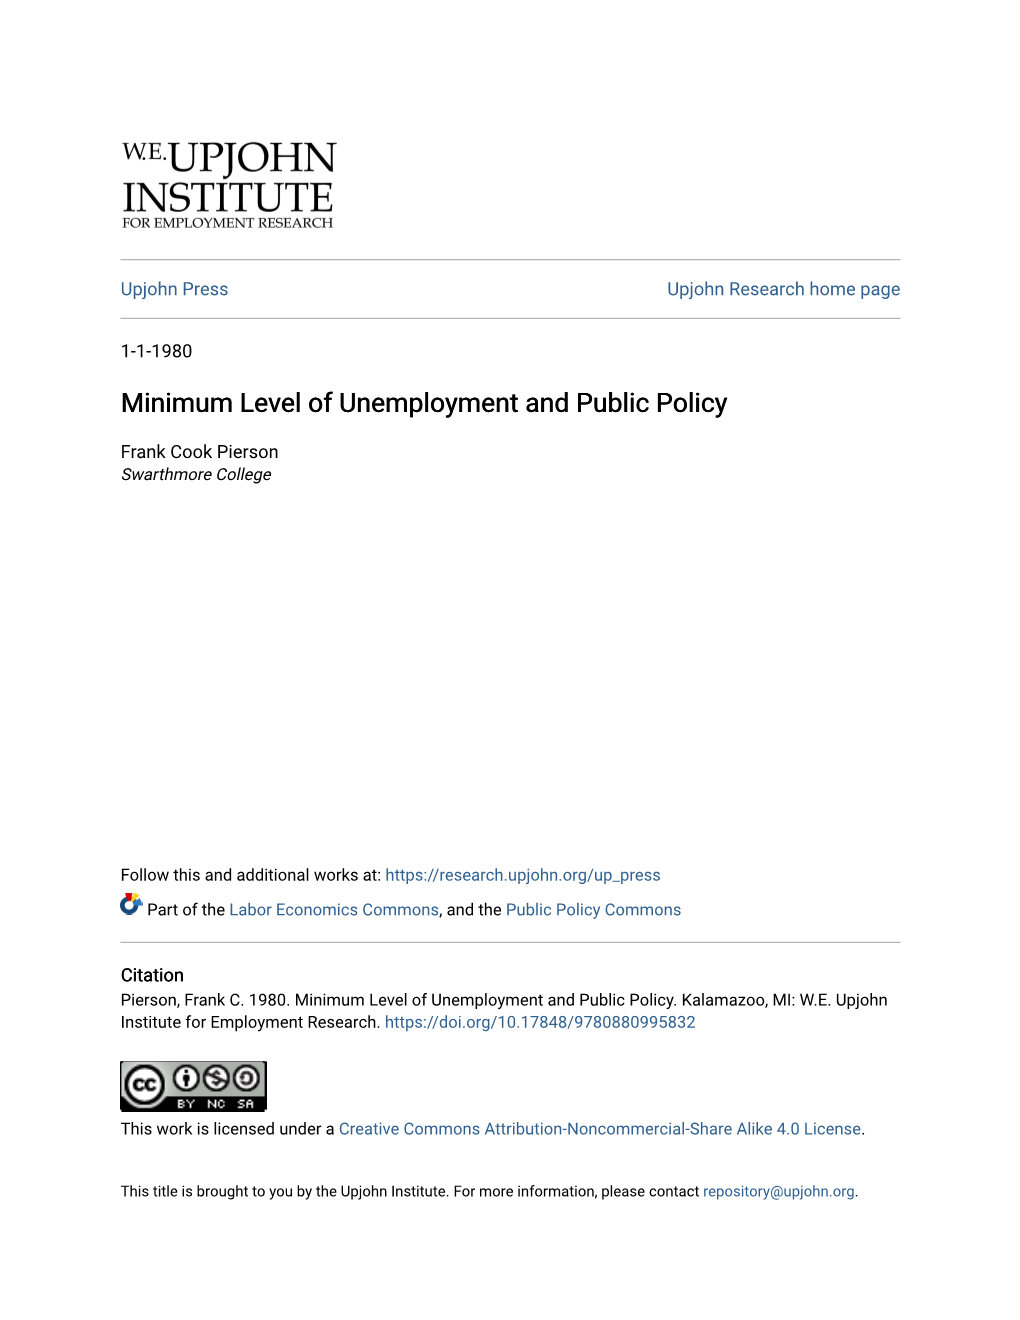 Minimum Level of Unemployment and Public Policy